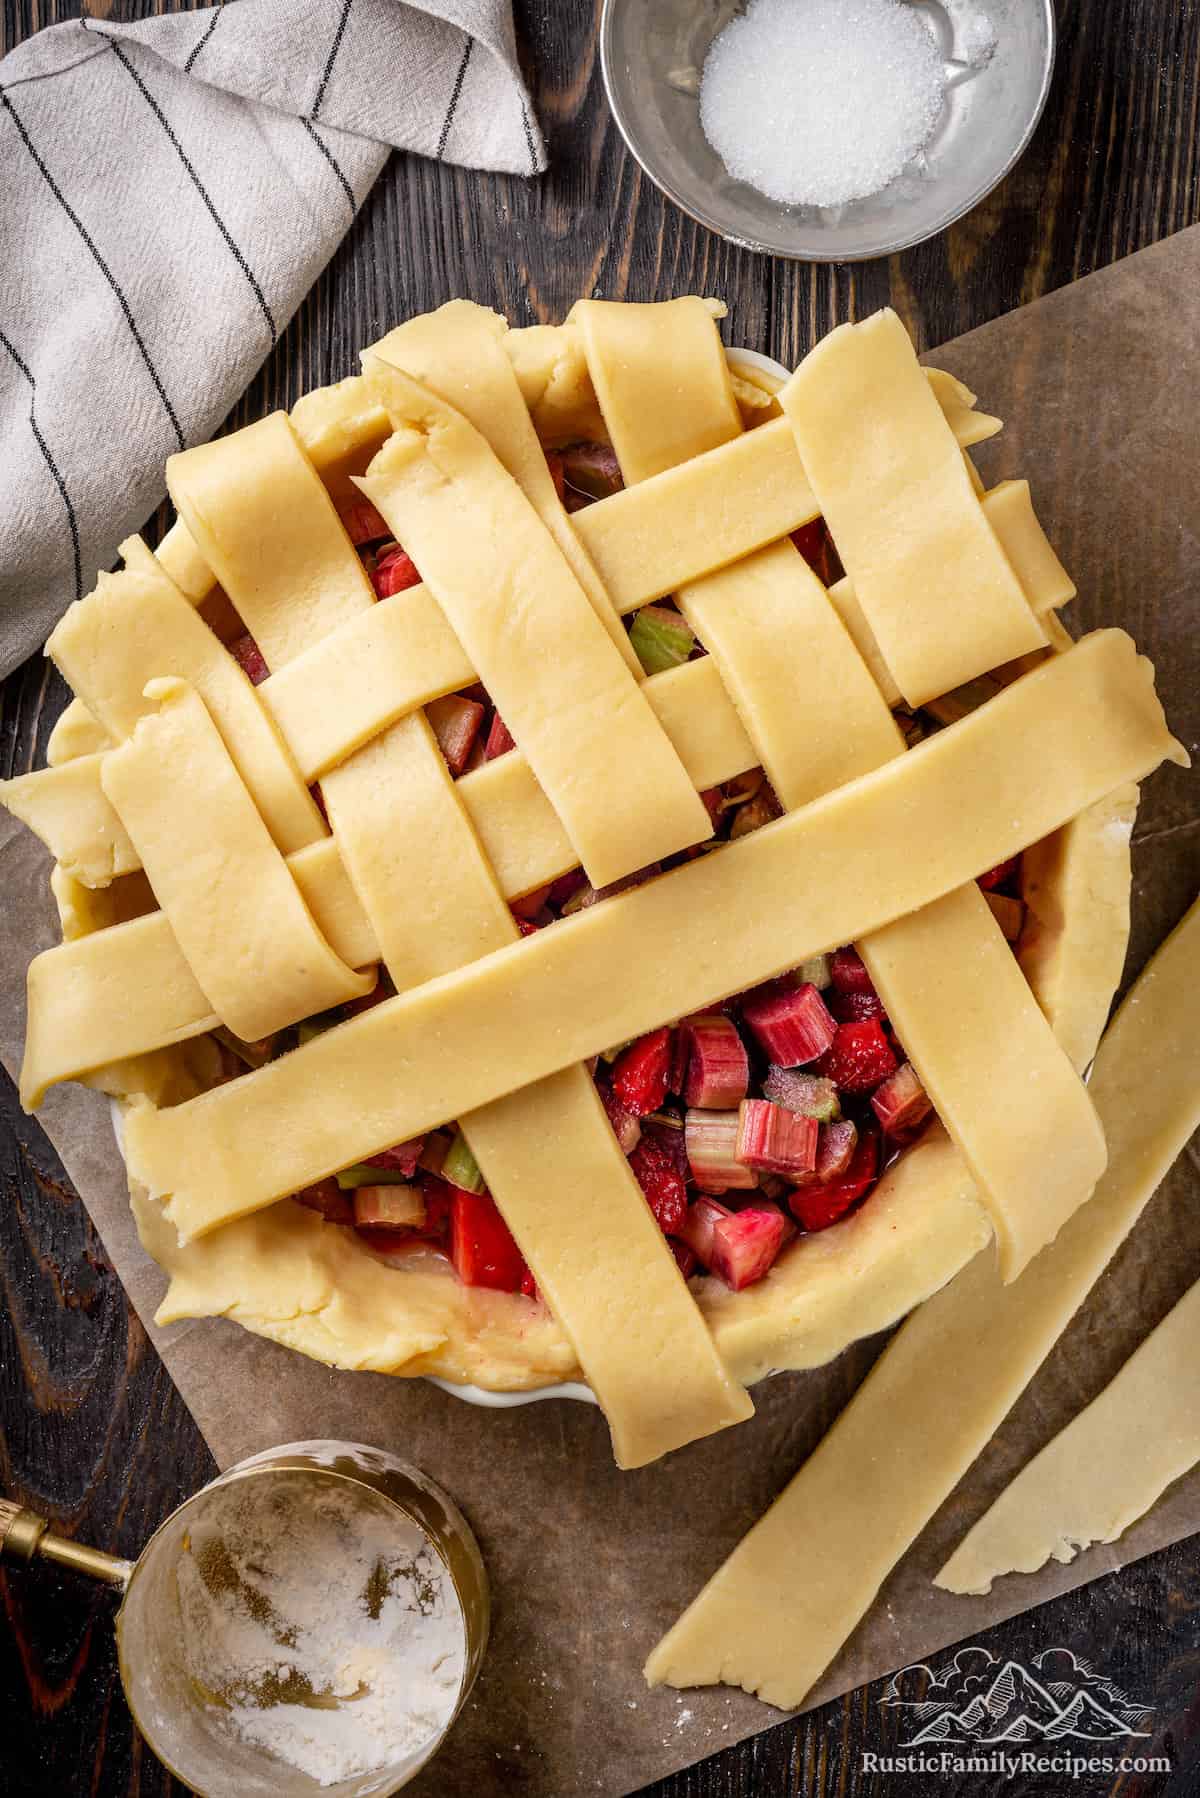 Top view of the lattice topping being assembled over a strawberry rhubarb pie.